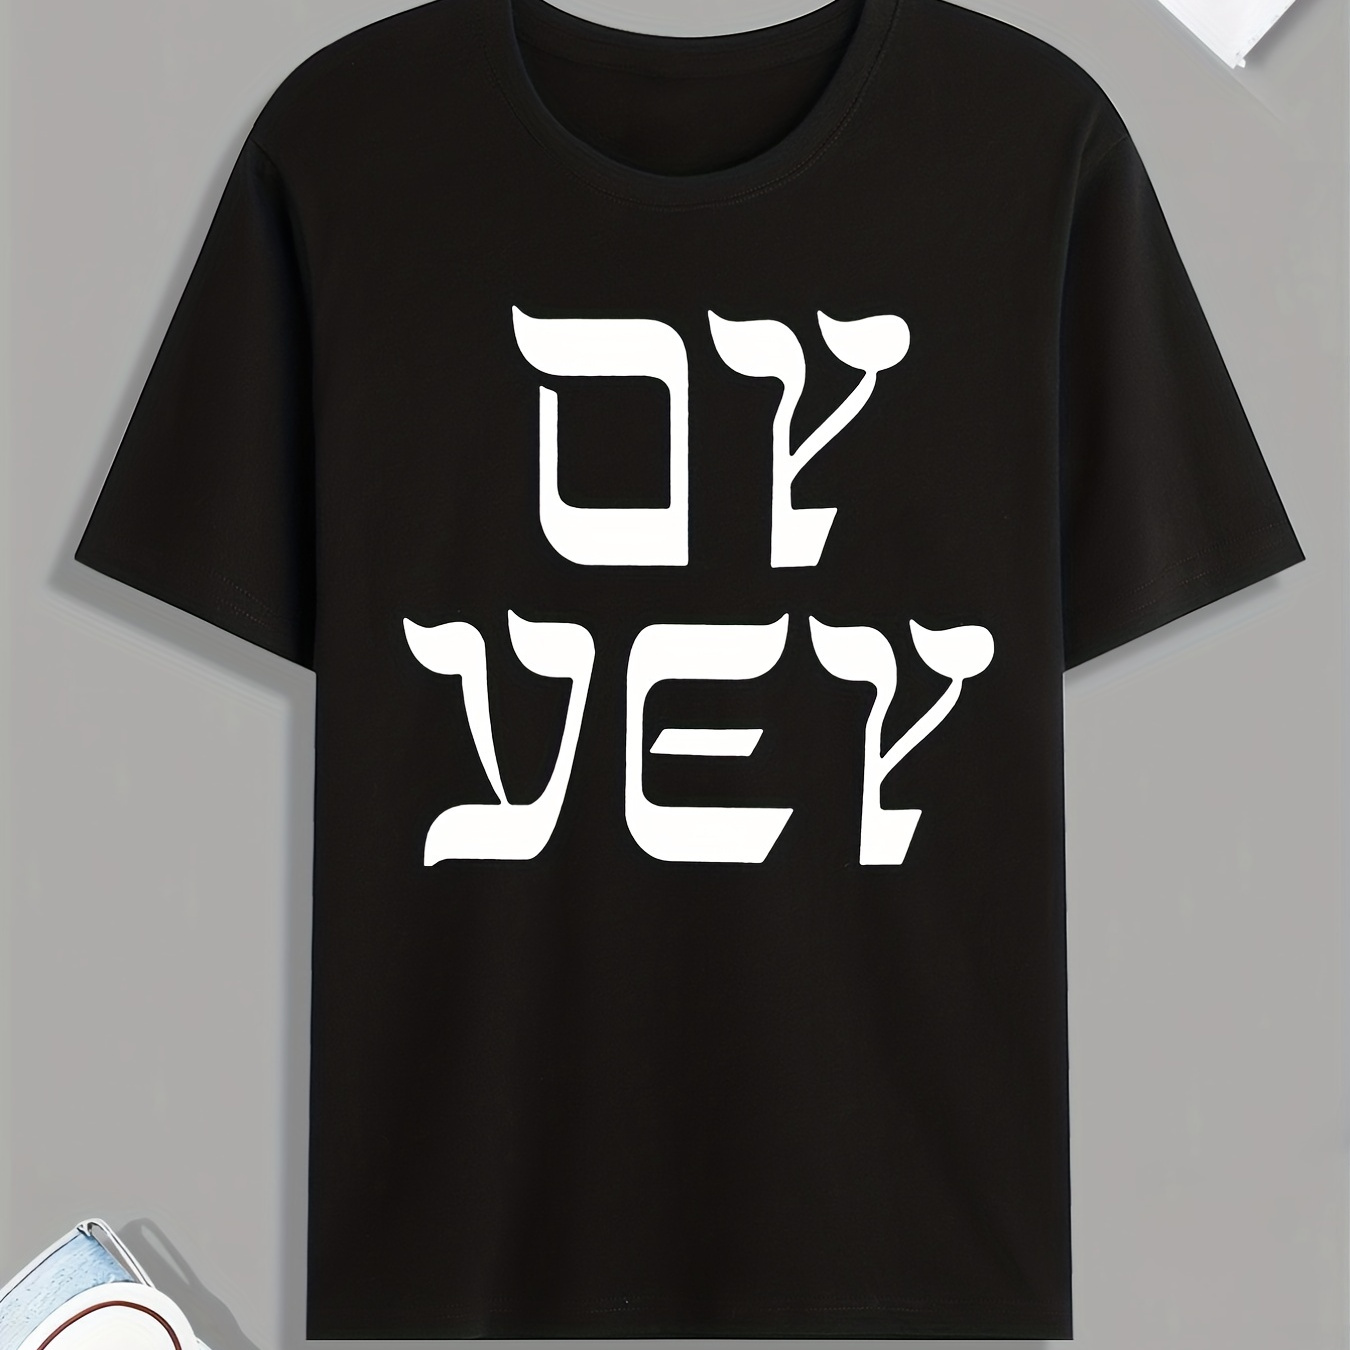 

'oy Vey' Jewish Print T Shirt, Tees For Men, Casual Short Sleeve Tshirt For Summer Spring Fall, Tops As Gifts